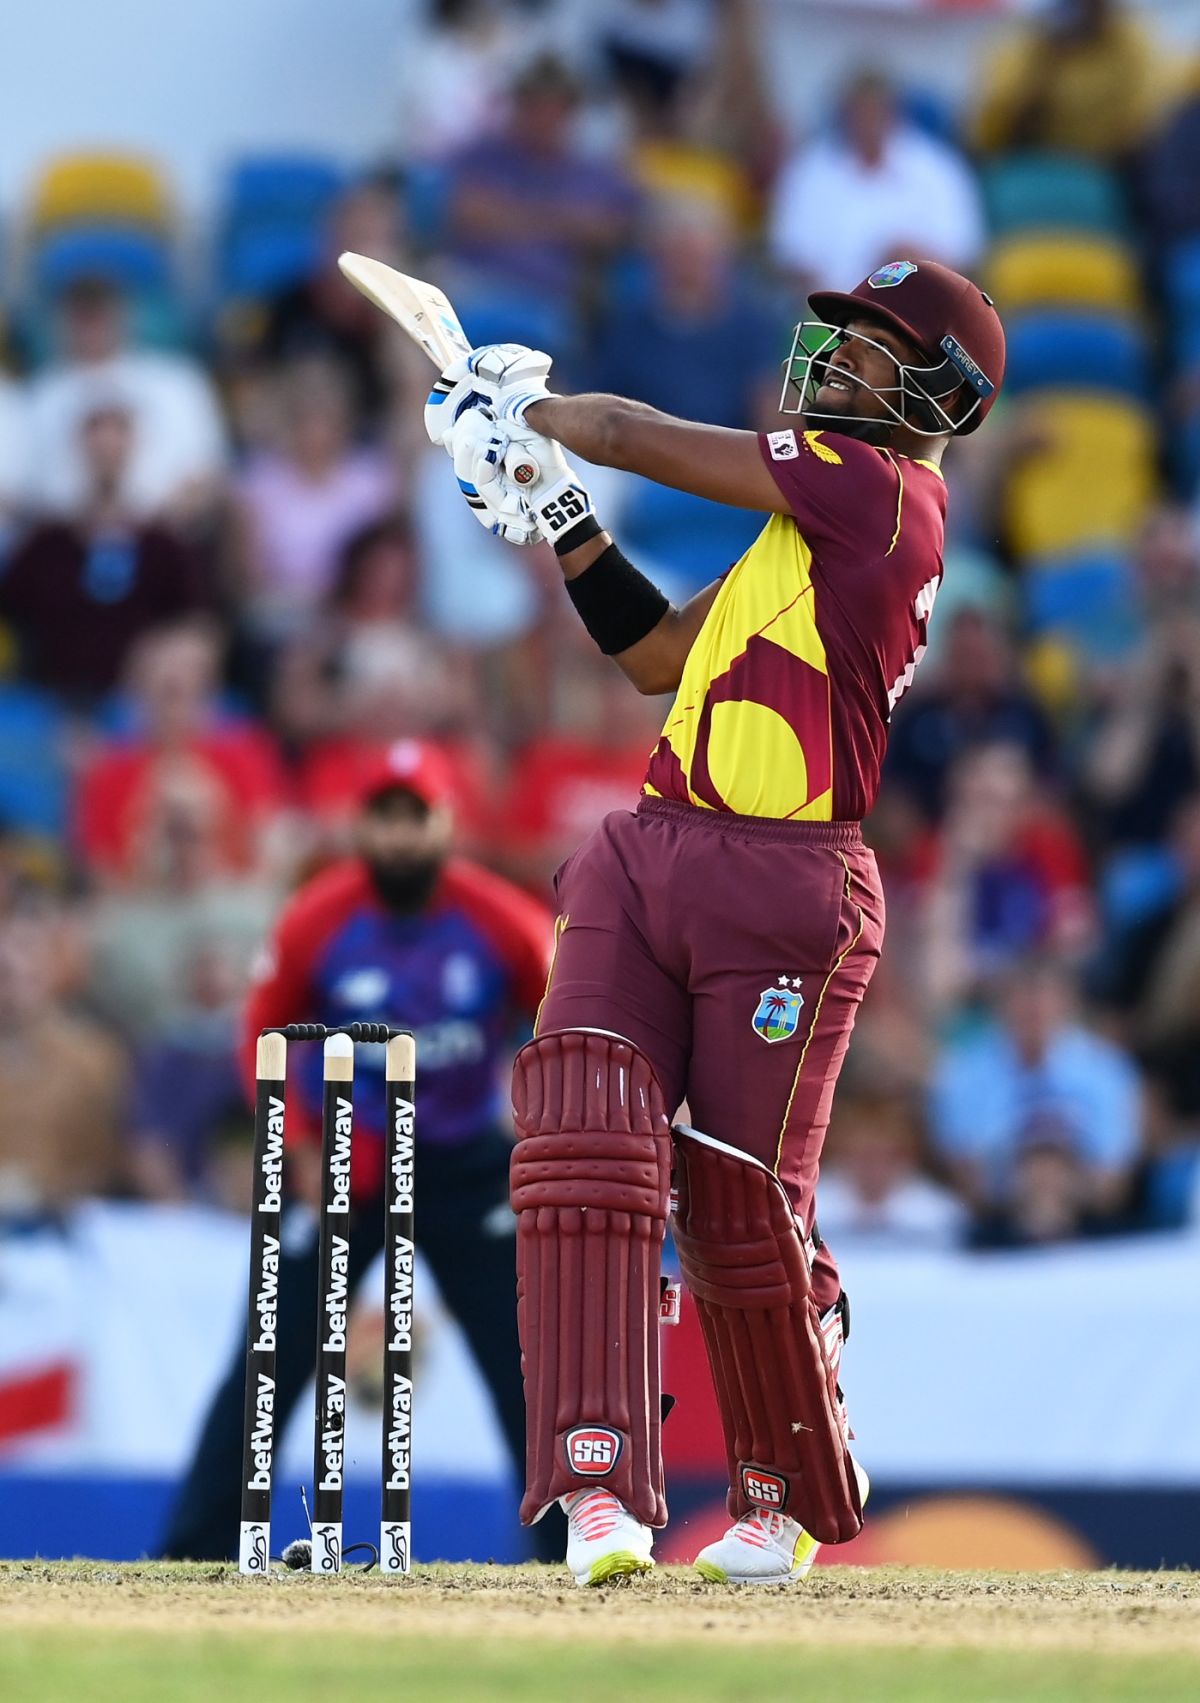 Nicholas Pooran takes the aggressive approach for West Indies, West Indies vs England, Kensington Oval, Barbados, 3rd T20I, January 26, 2022